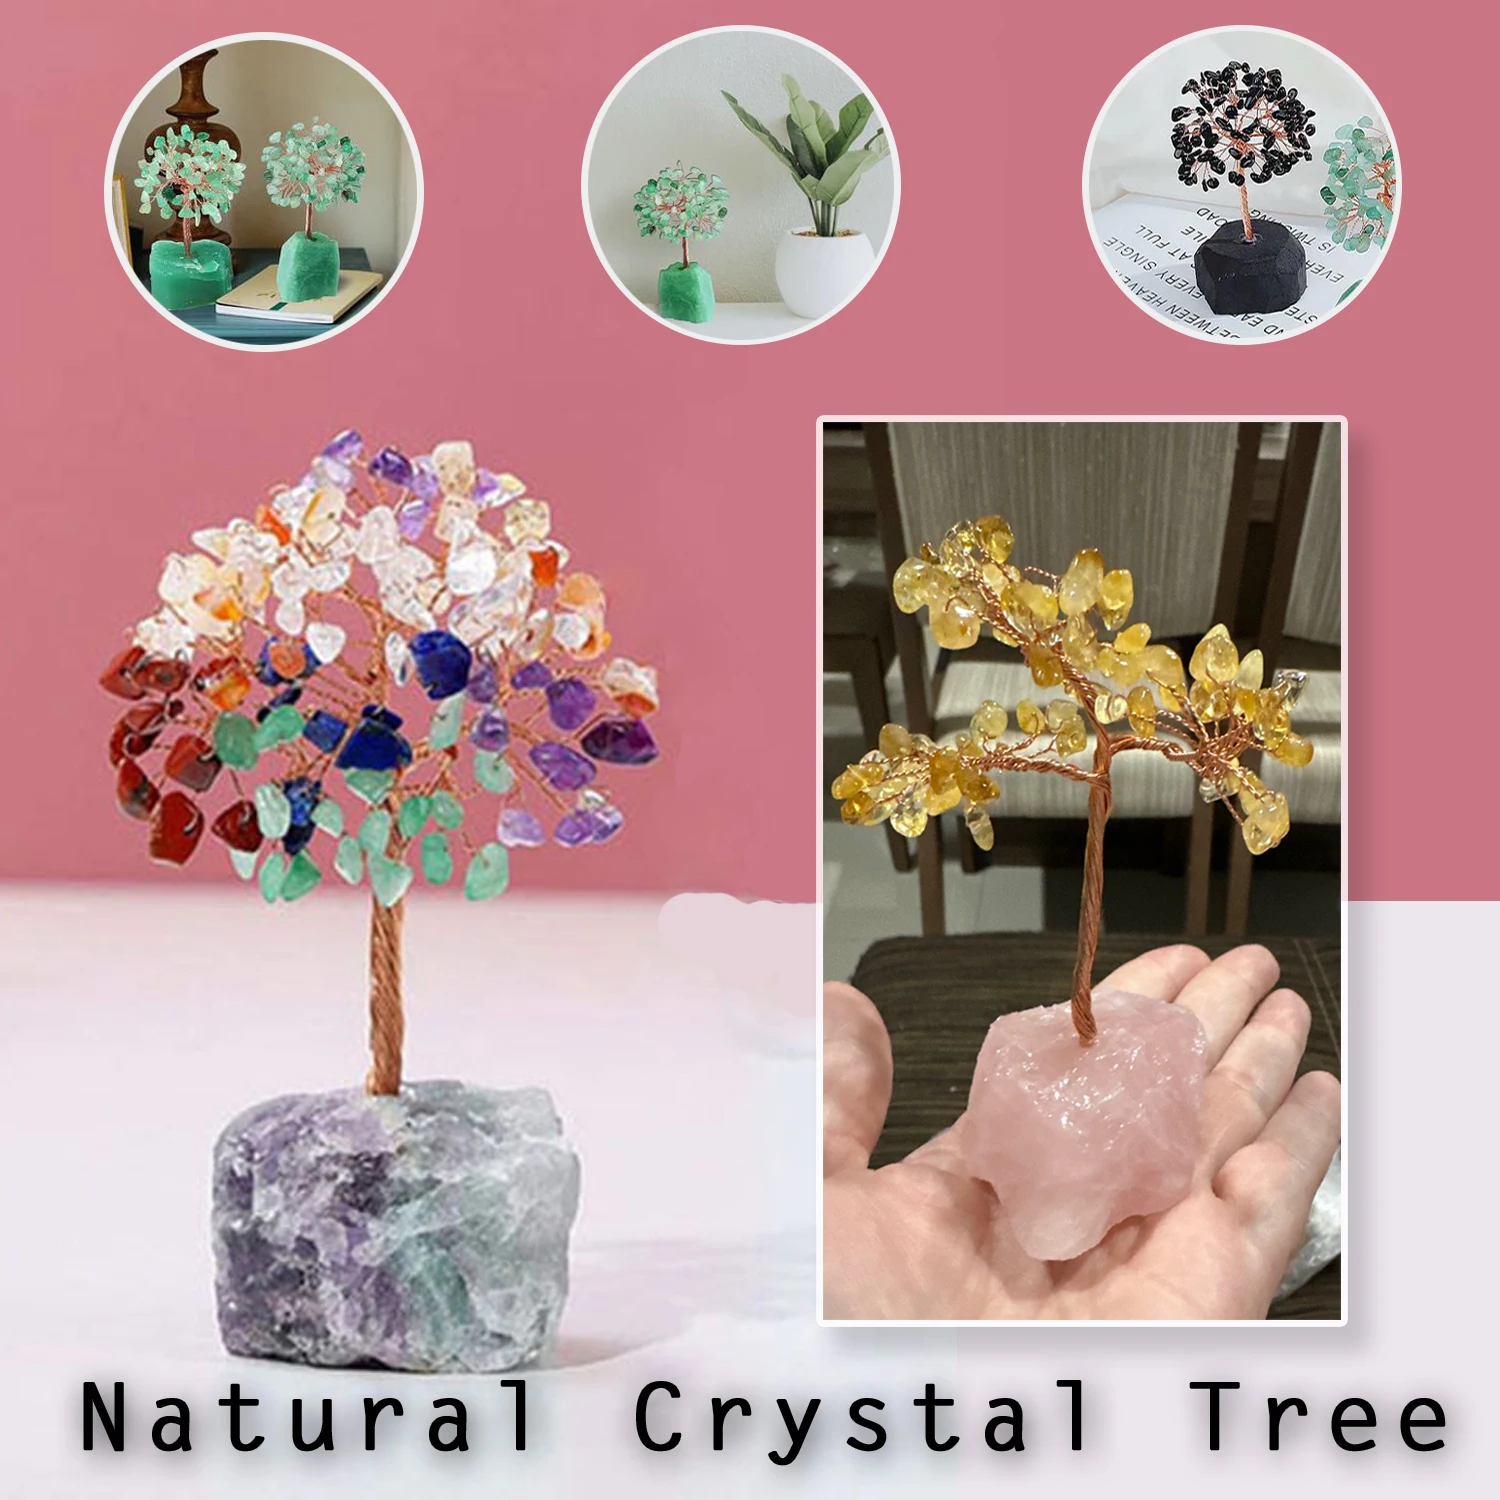 

Natural Amethyst Healing Crystal Gem Weeping Willow Agate Slices Gemstone Reiki Chakra Feng Shui Trees Home Decor Accessories